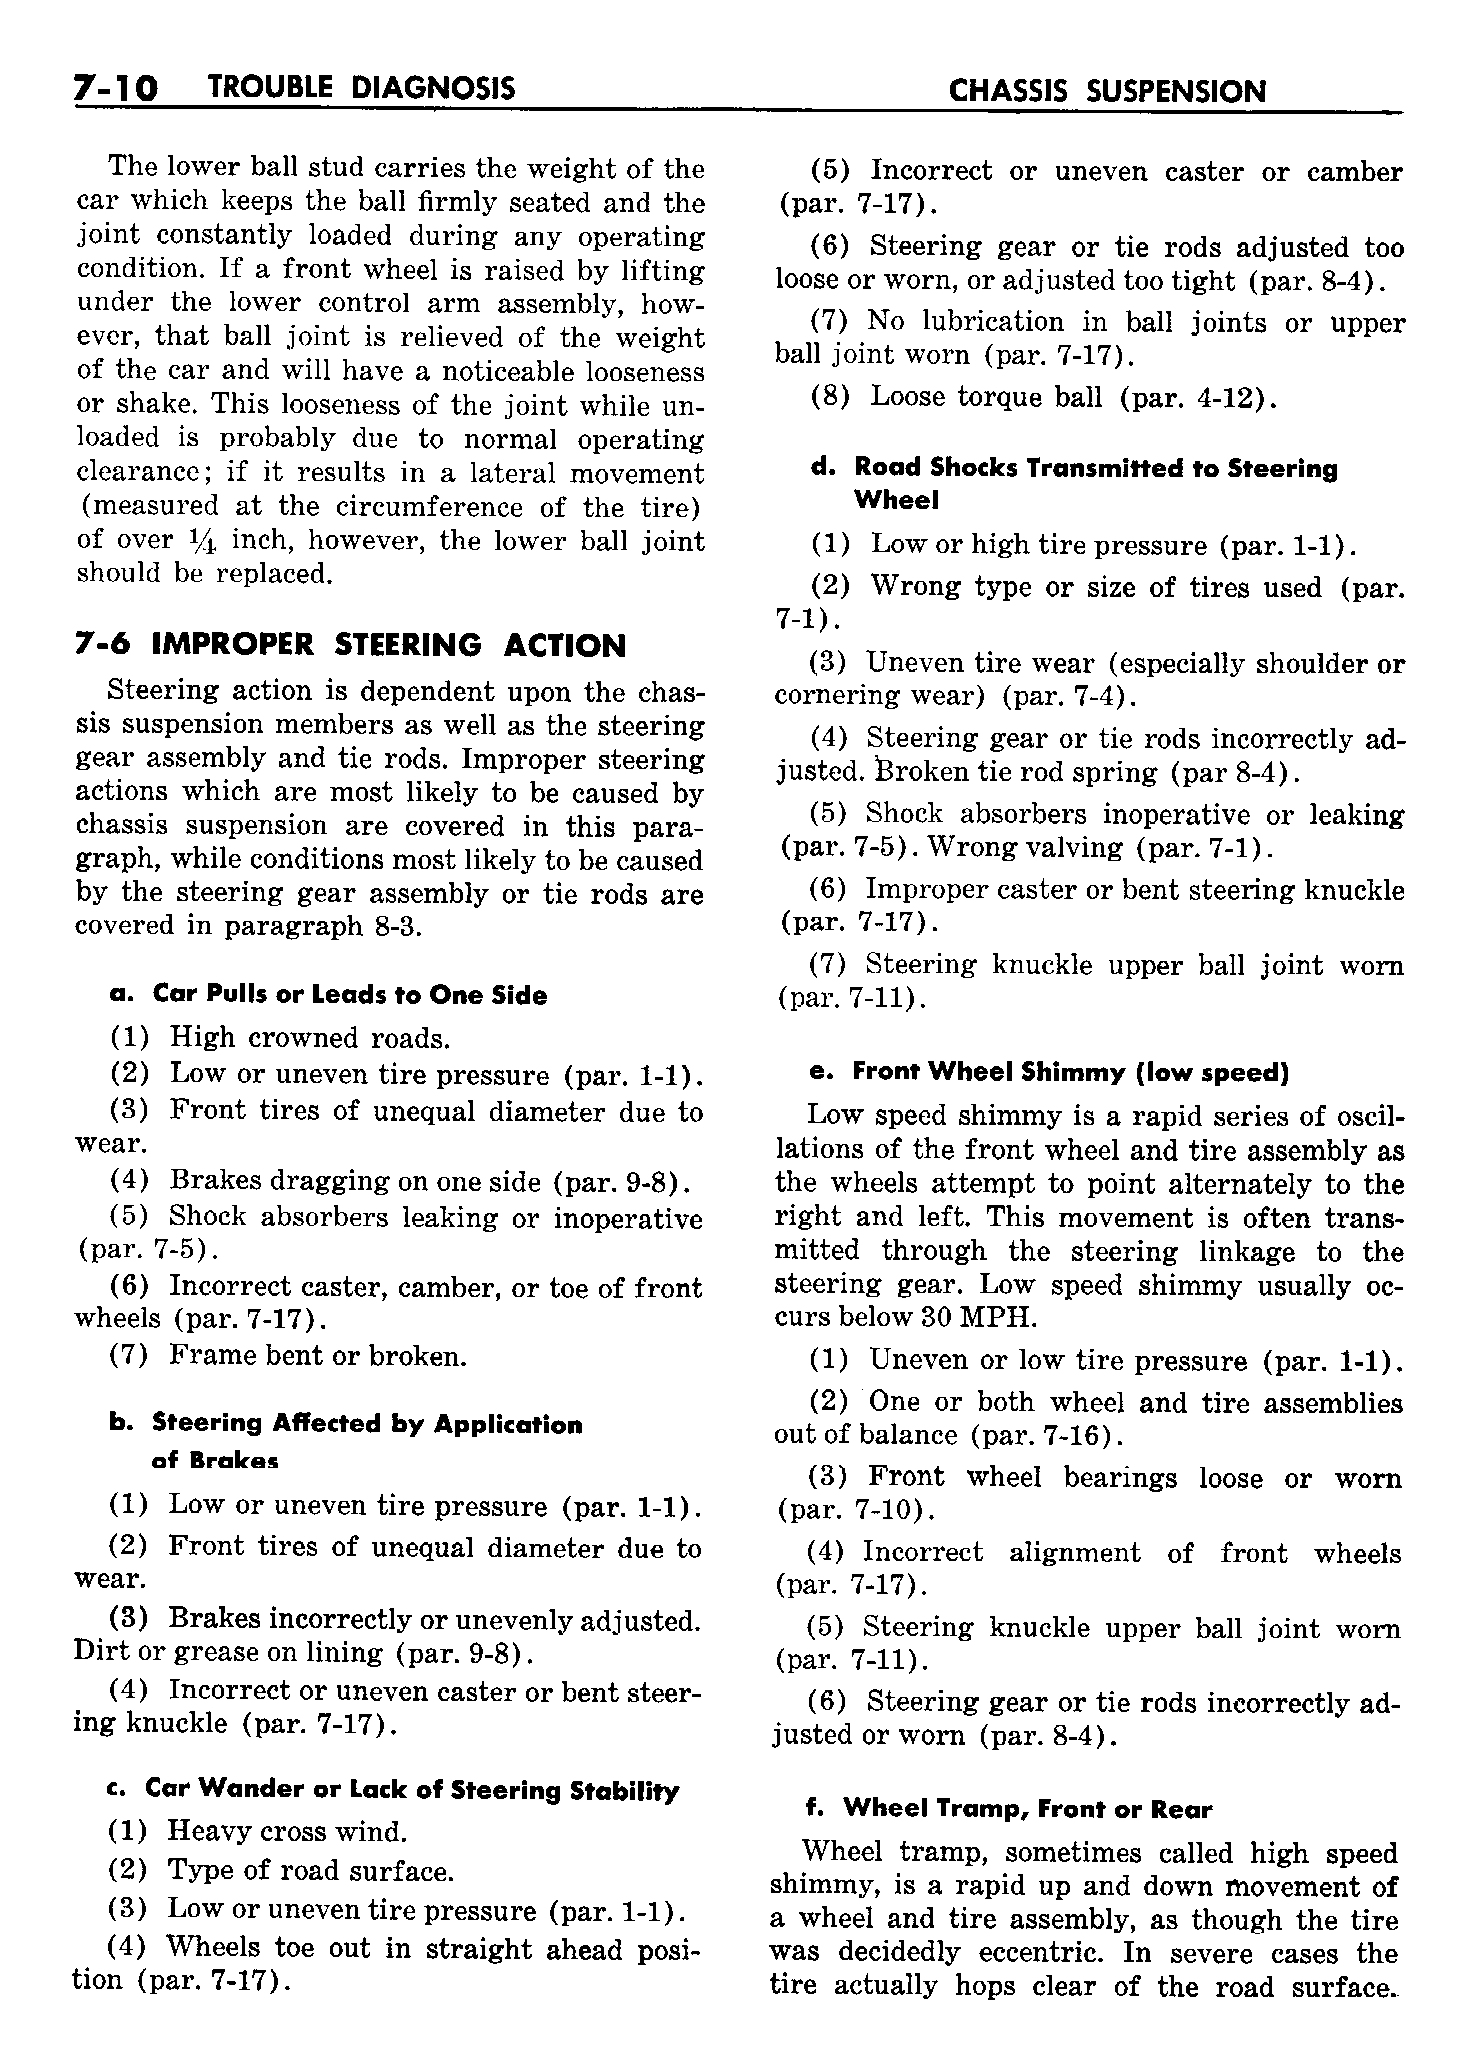 n_08 1958 Buick Shop Manual - Chassis Suspension_10.jpg